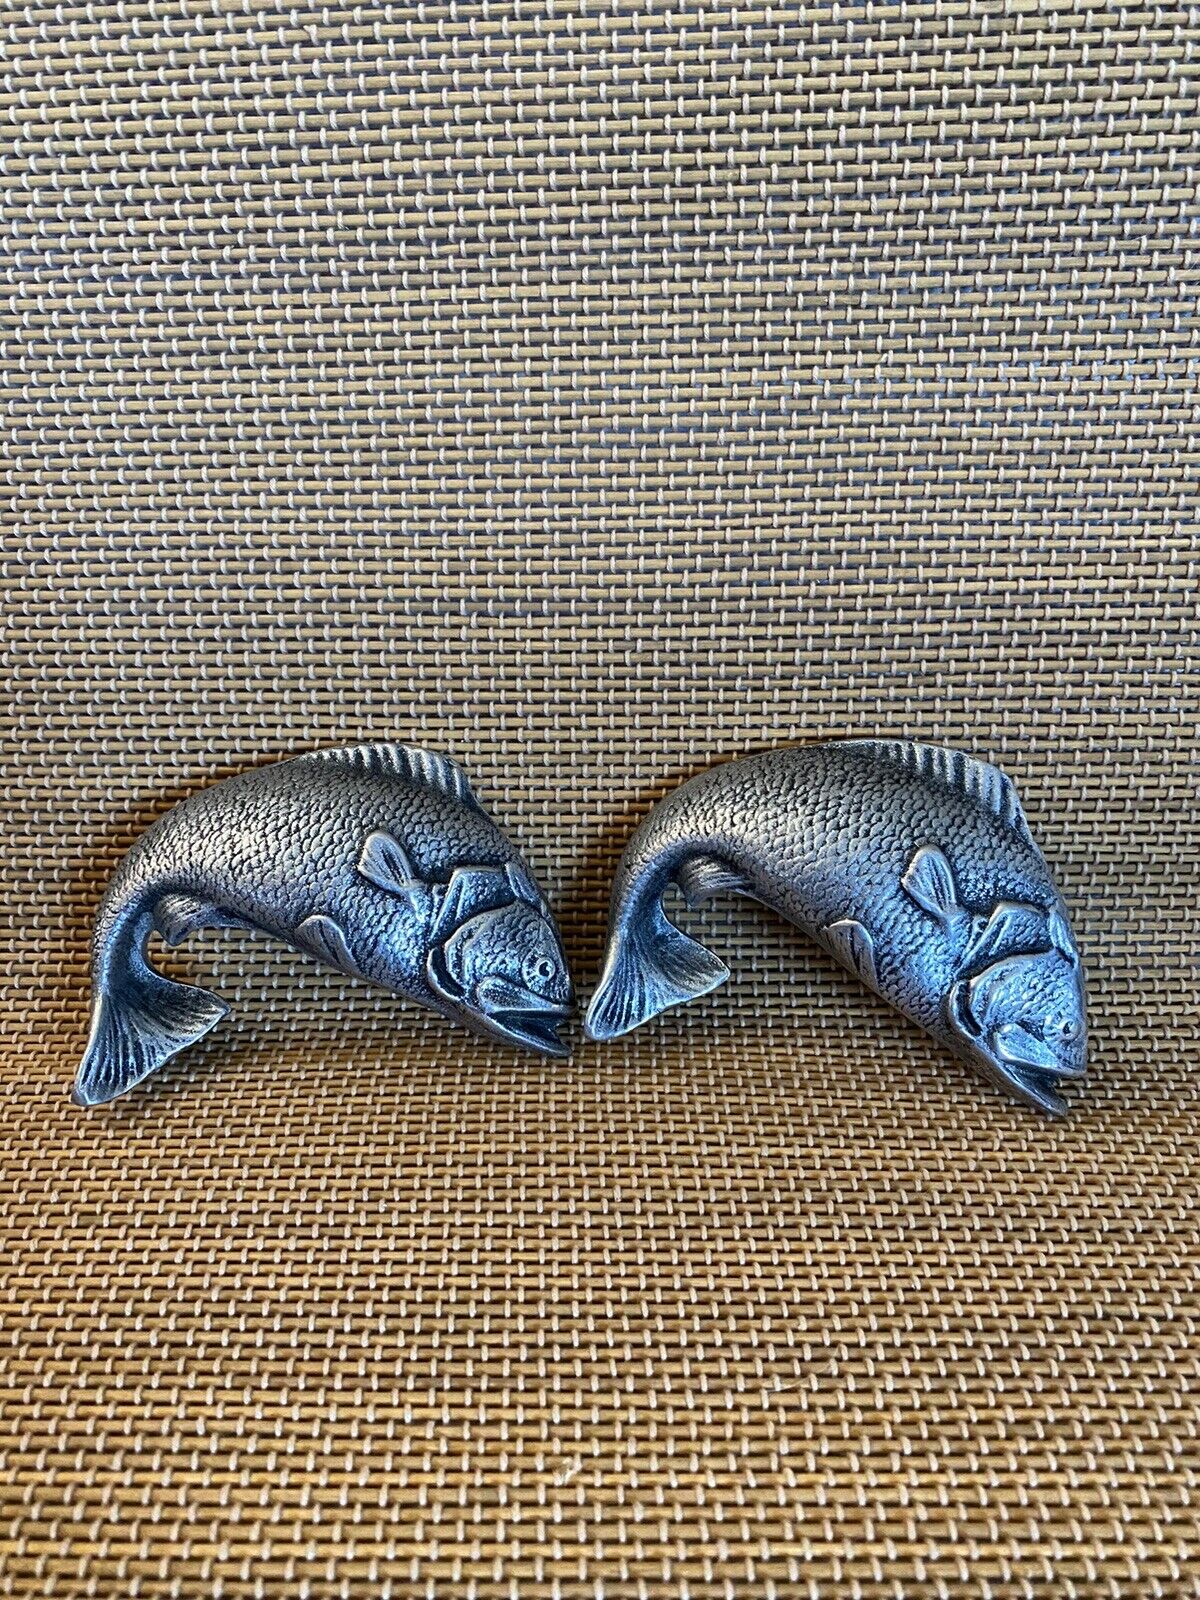 Pewter Bass Fish Drawer Pulls Approx 5” X 5” Set Of 2